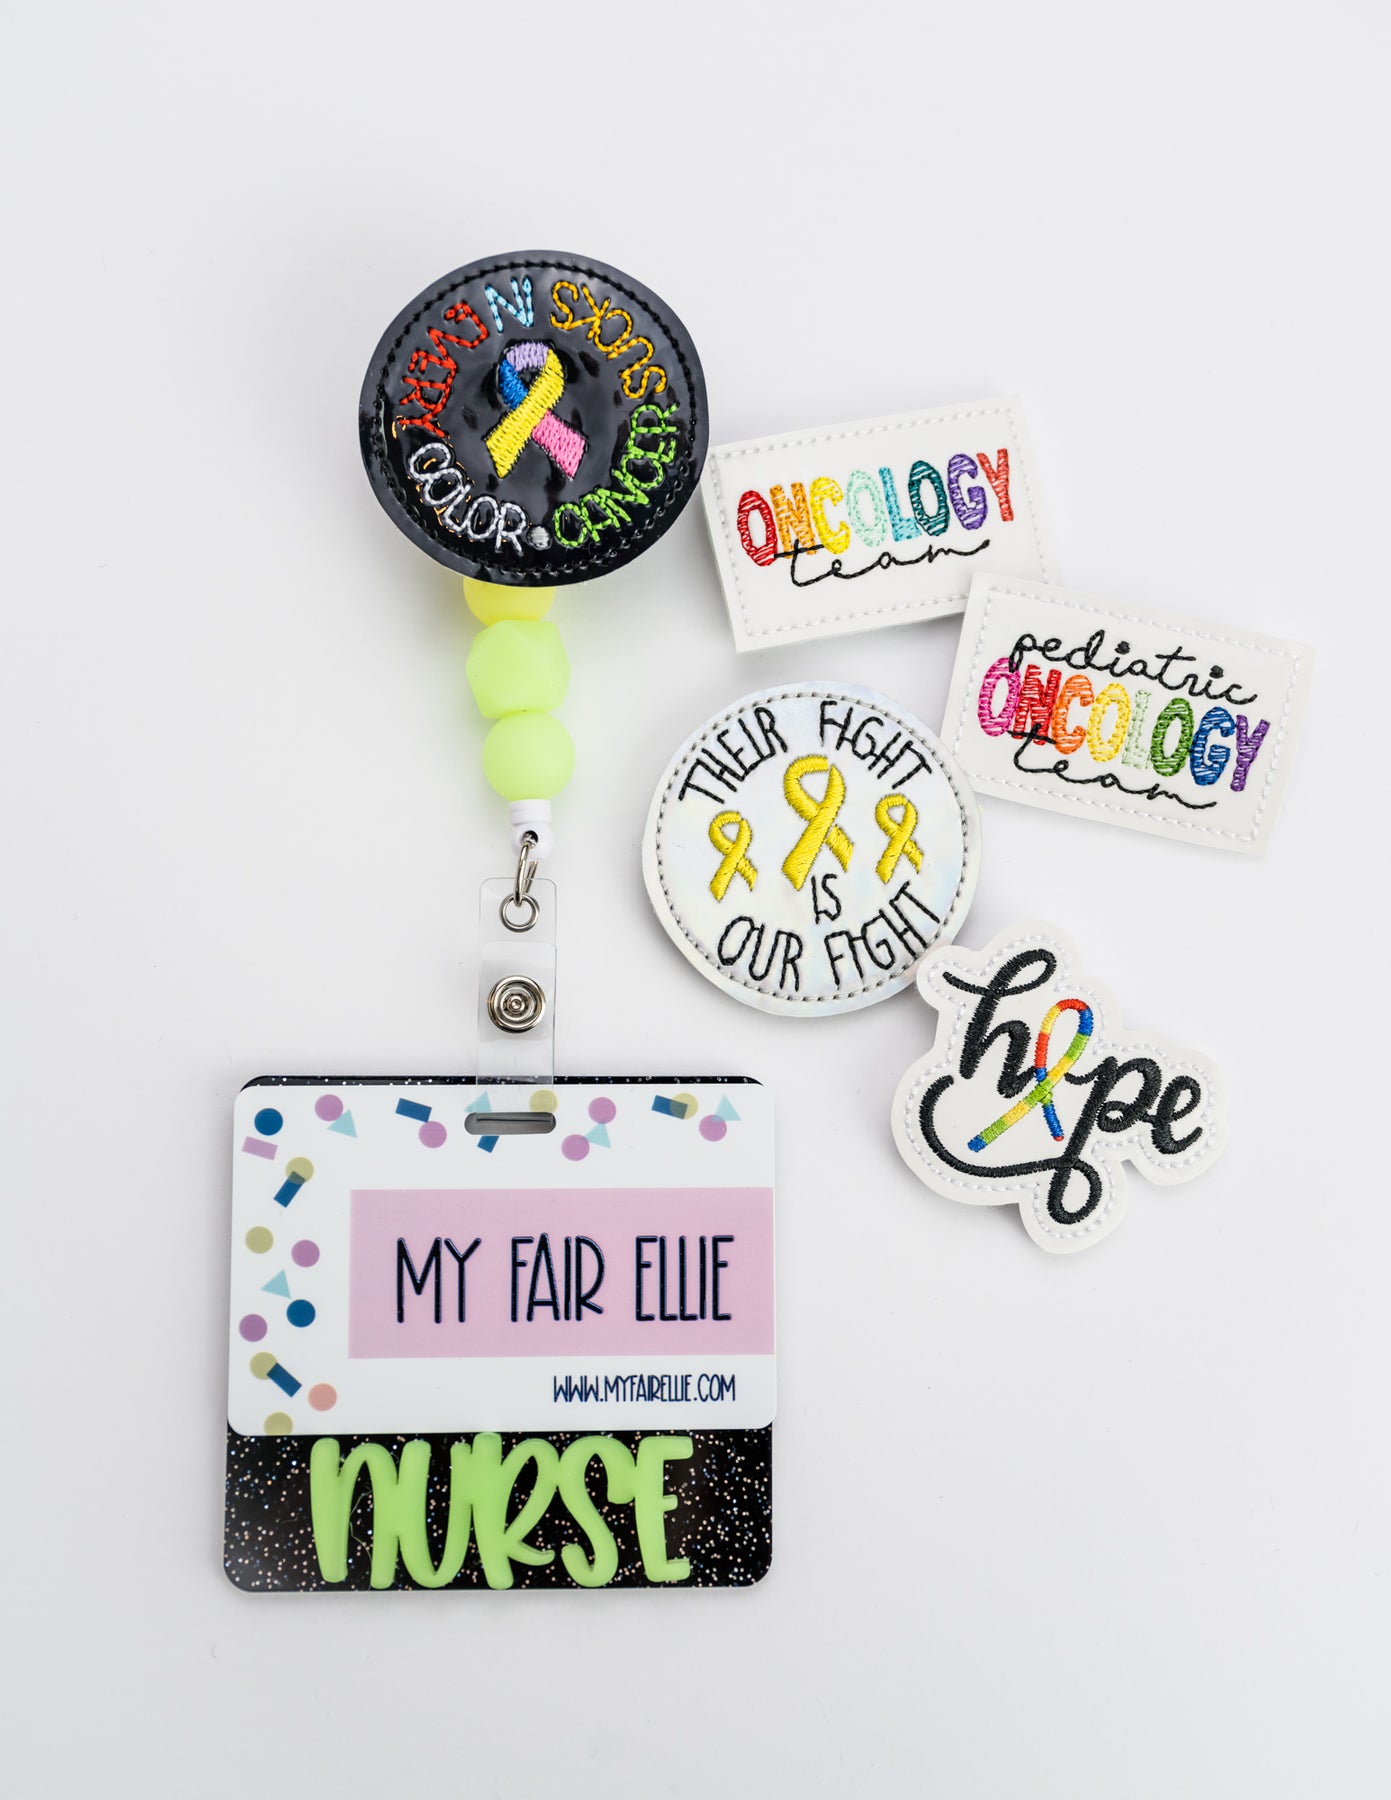 Funny Badge Reel Notified and Aware Retractable Badge Holder